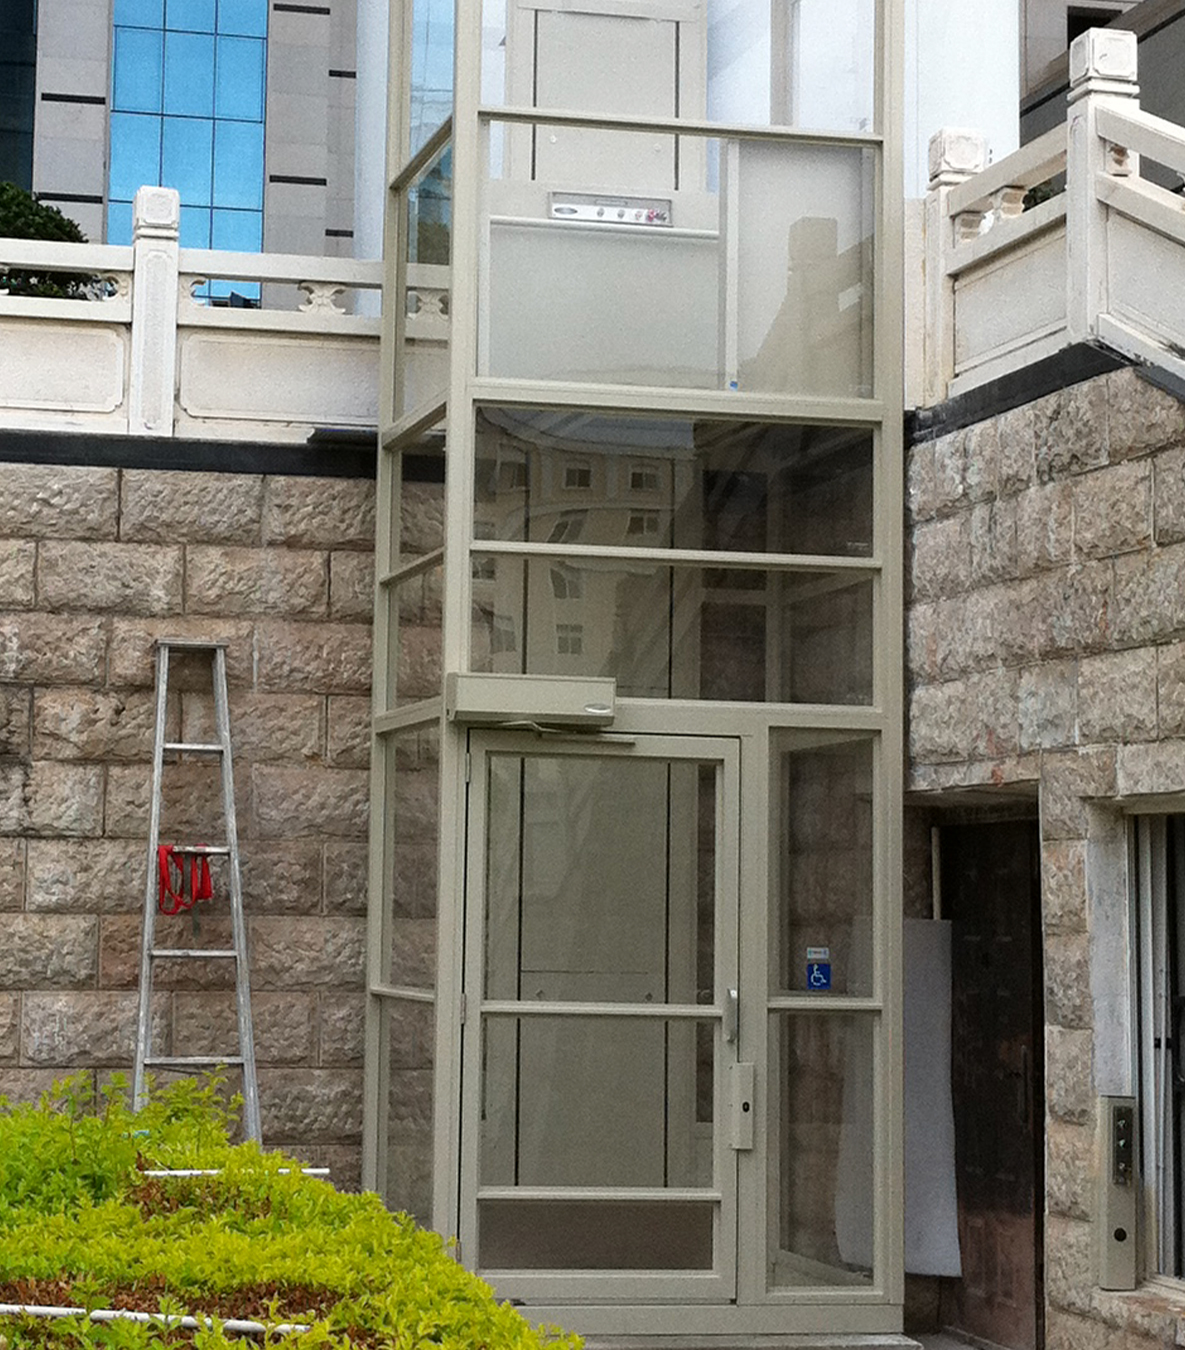 Vertical platform lift with full enclosure installed outside on a porch